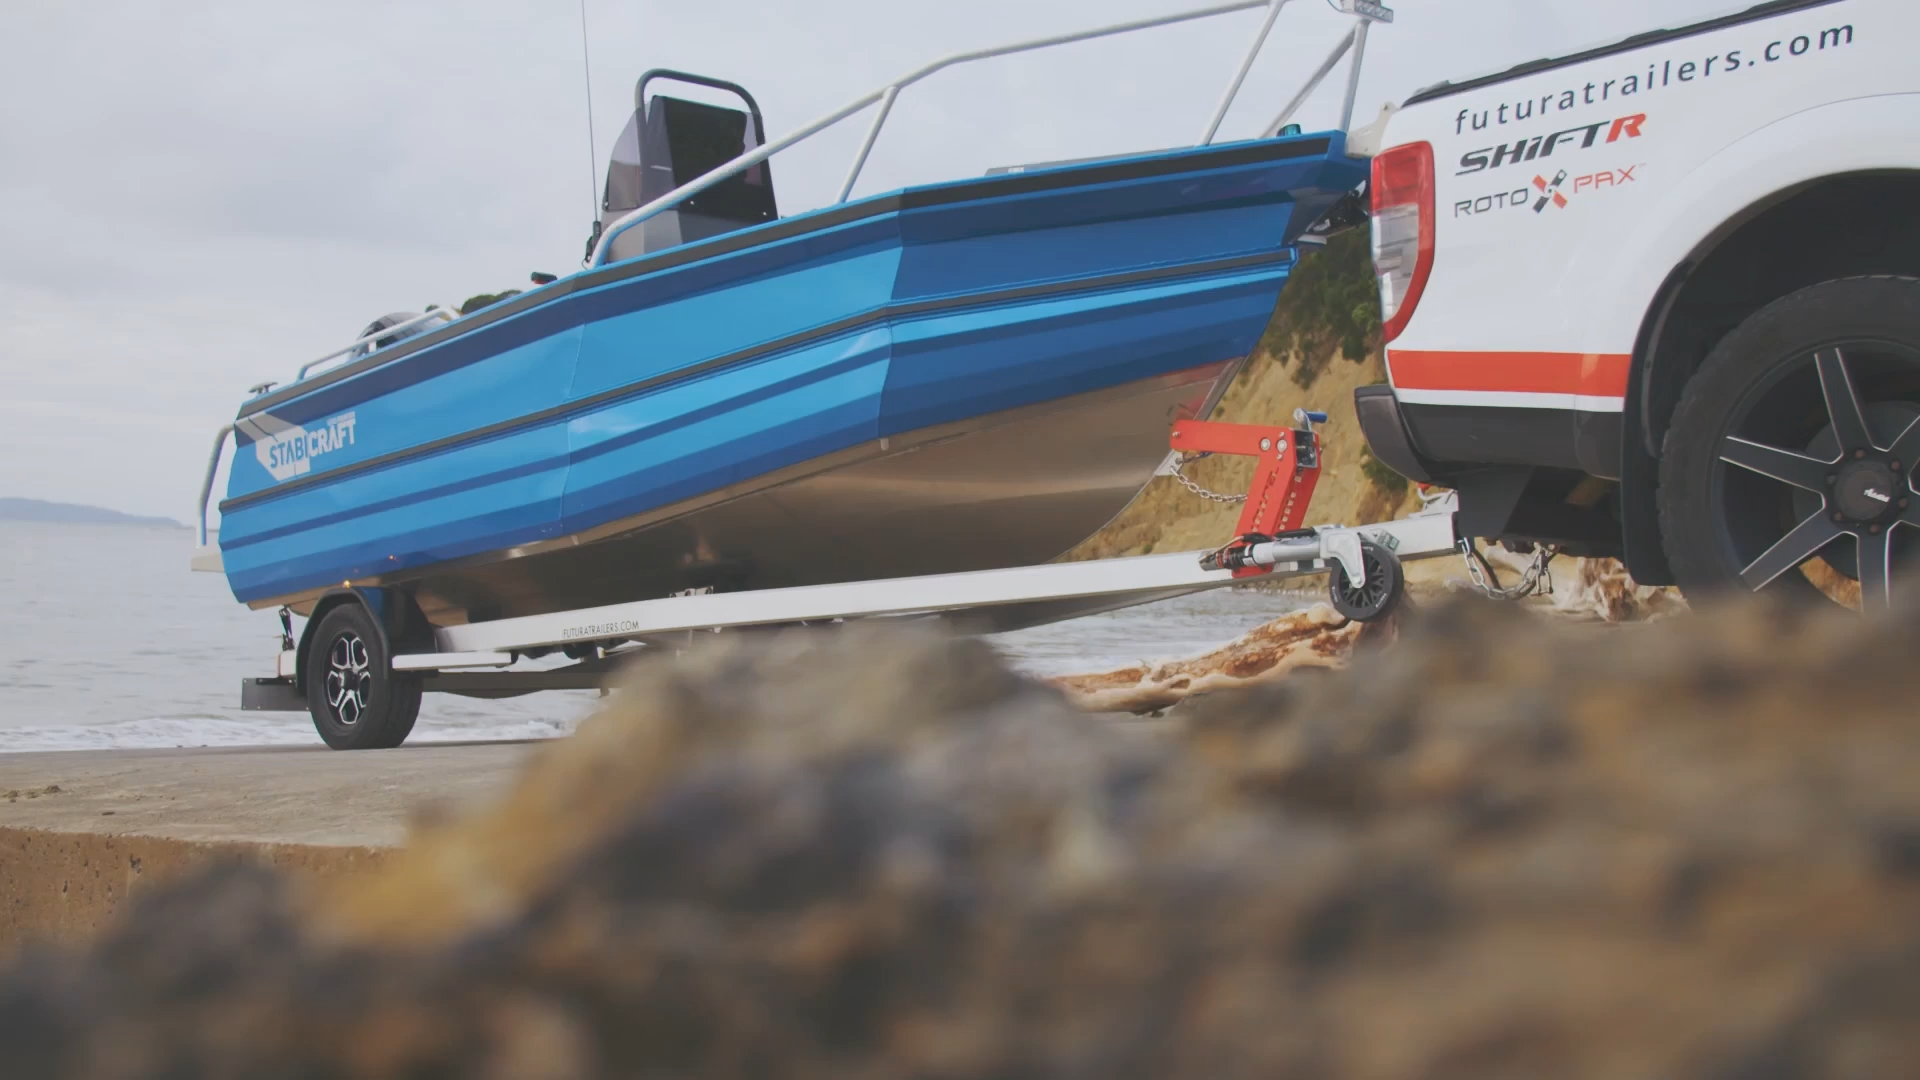 Futura S475 QDK Boat Trailer at the beach, near water, with rocks in the foreground